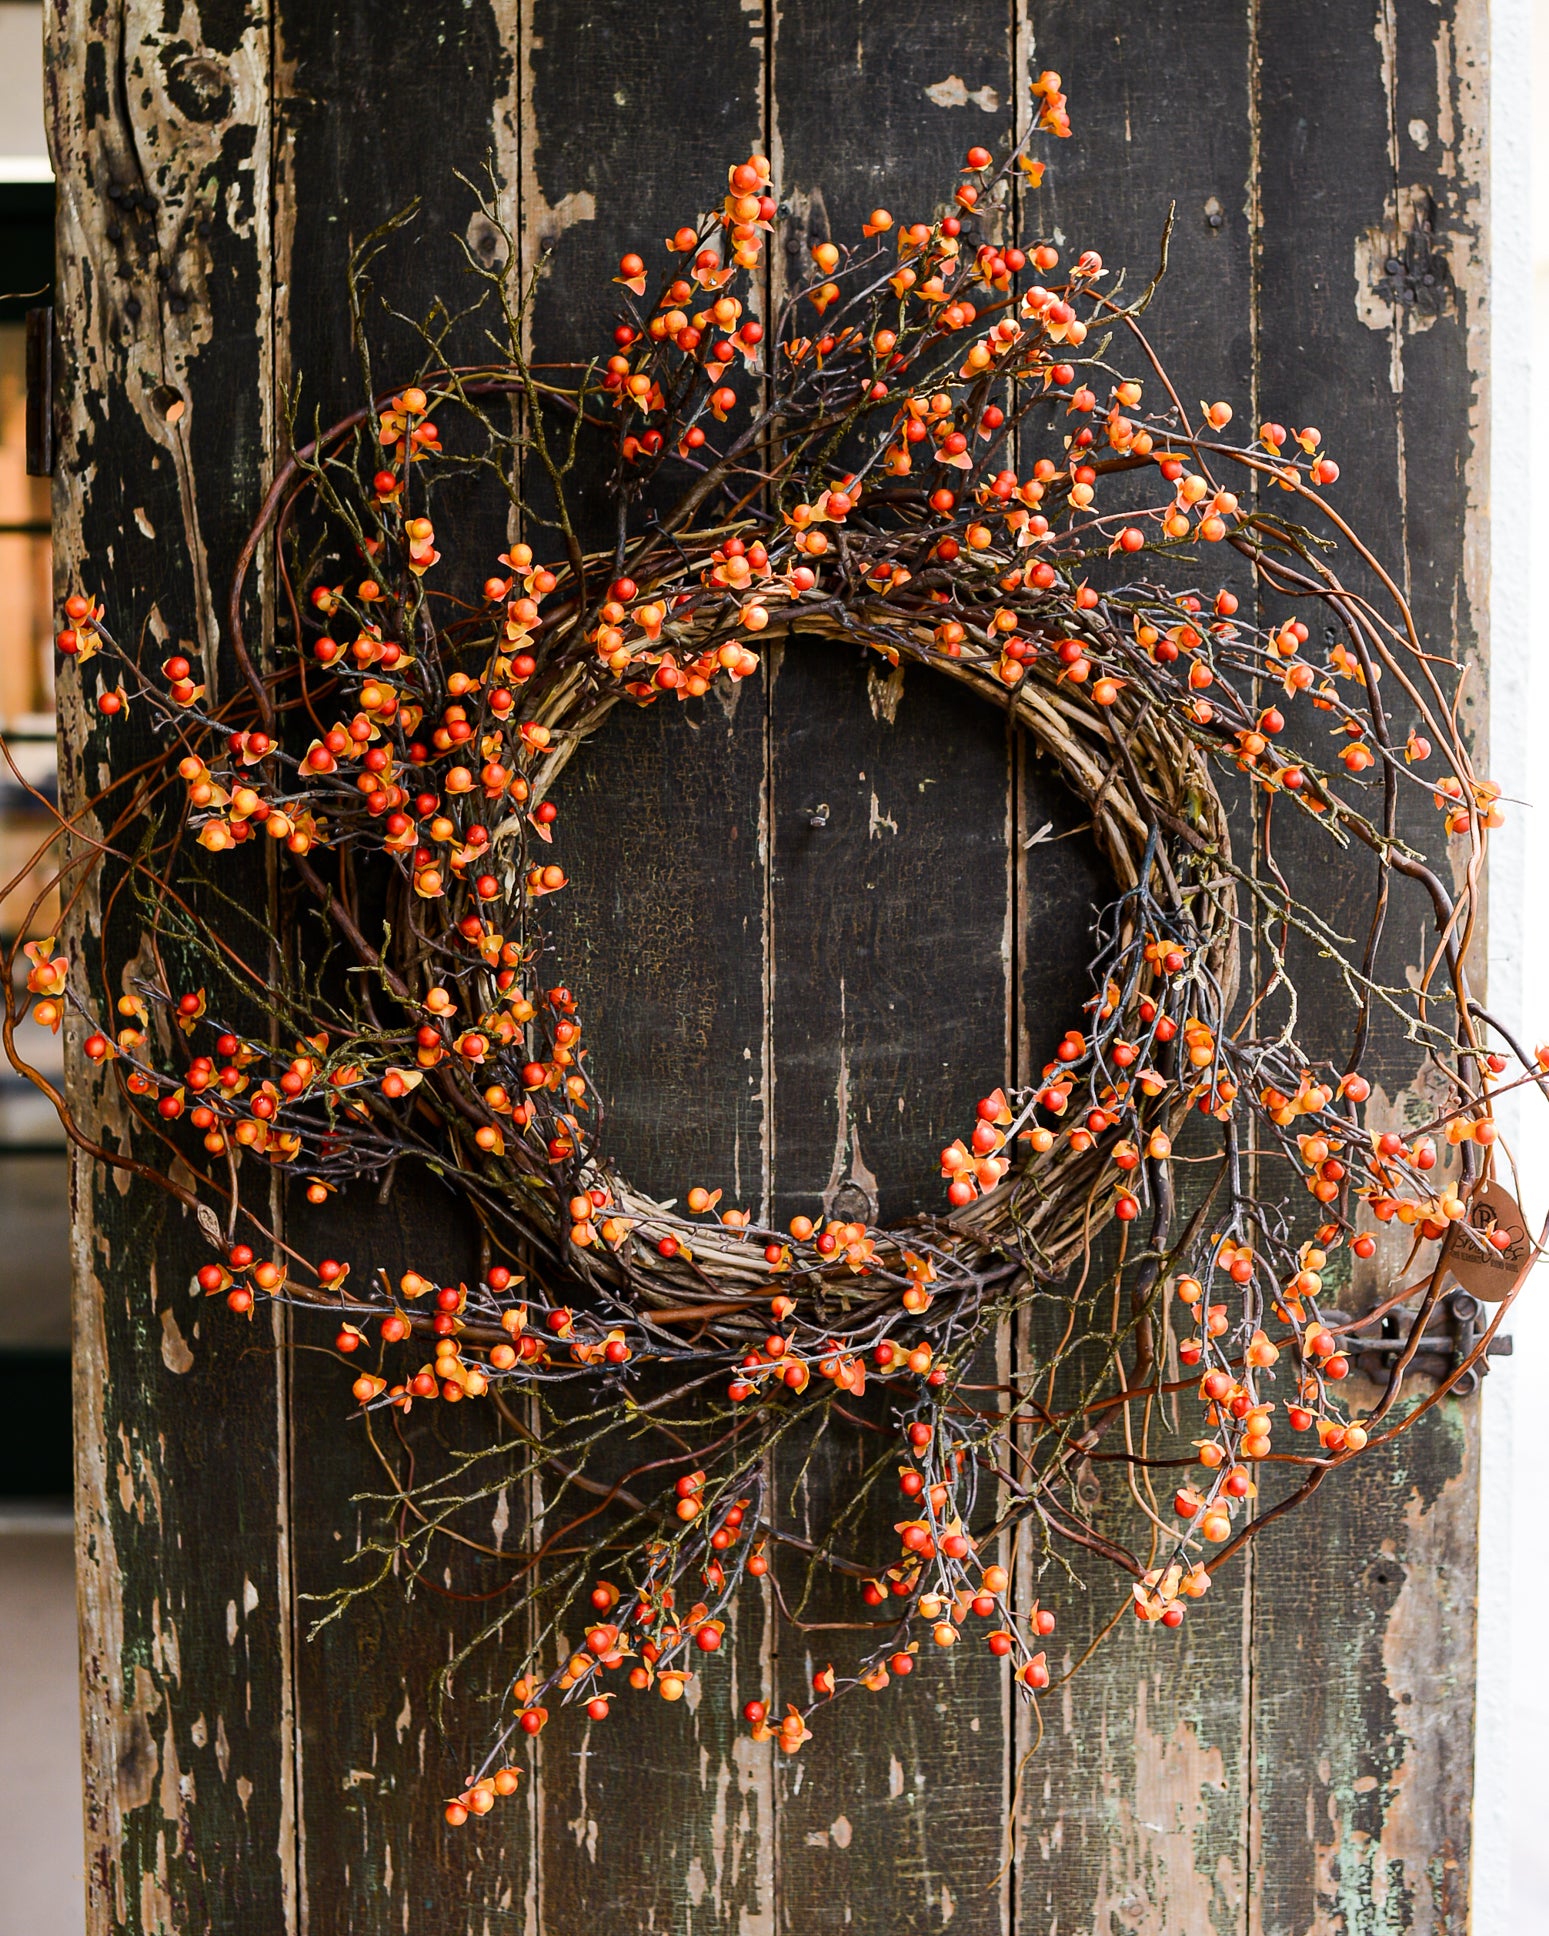 Bittersweet and Willow Wreath